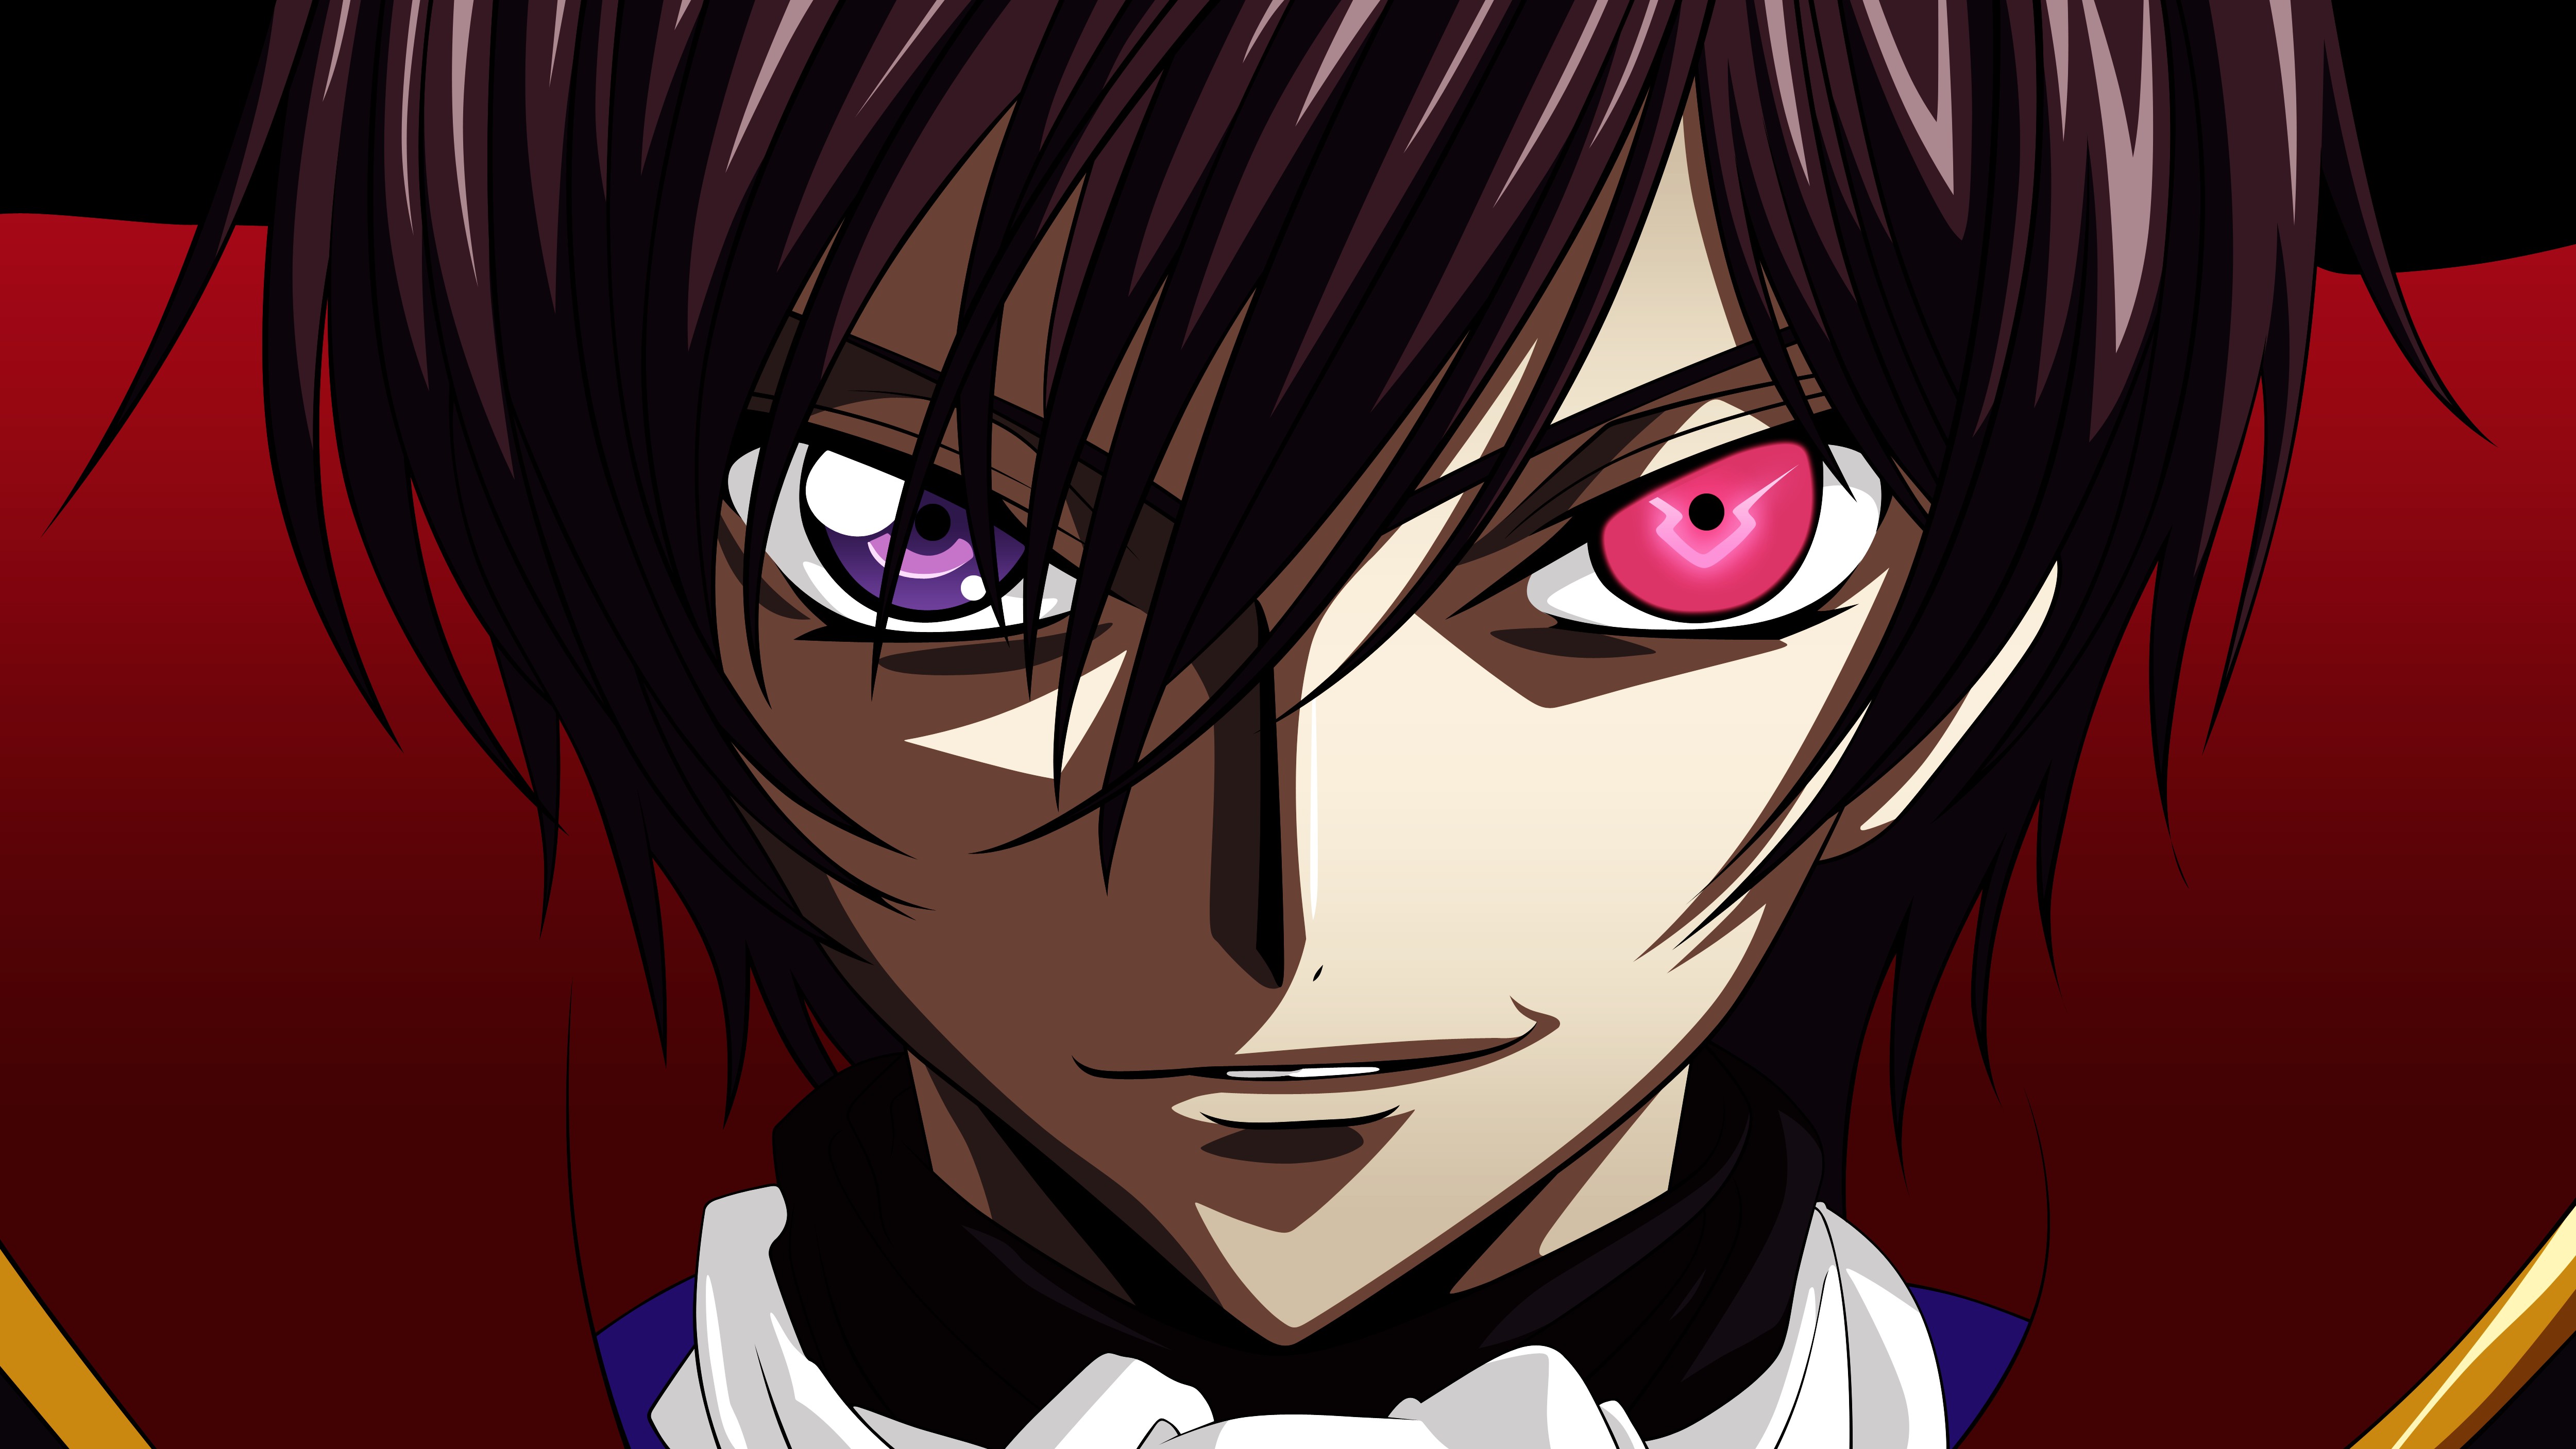 Lelouch Lamperouge [2] (Code Geass) by ncoll36  Anime, Lelouch lamperouge, Code  geass wallpaper